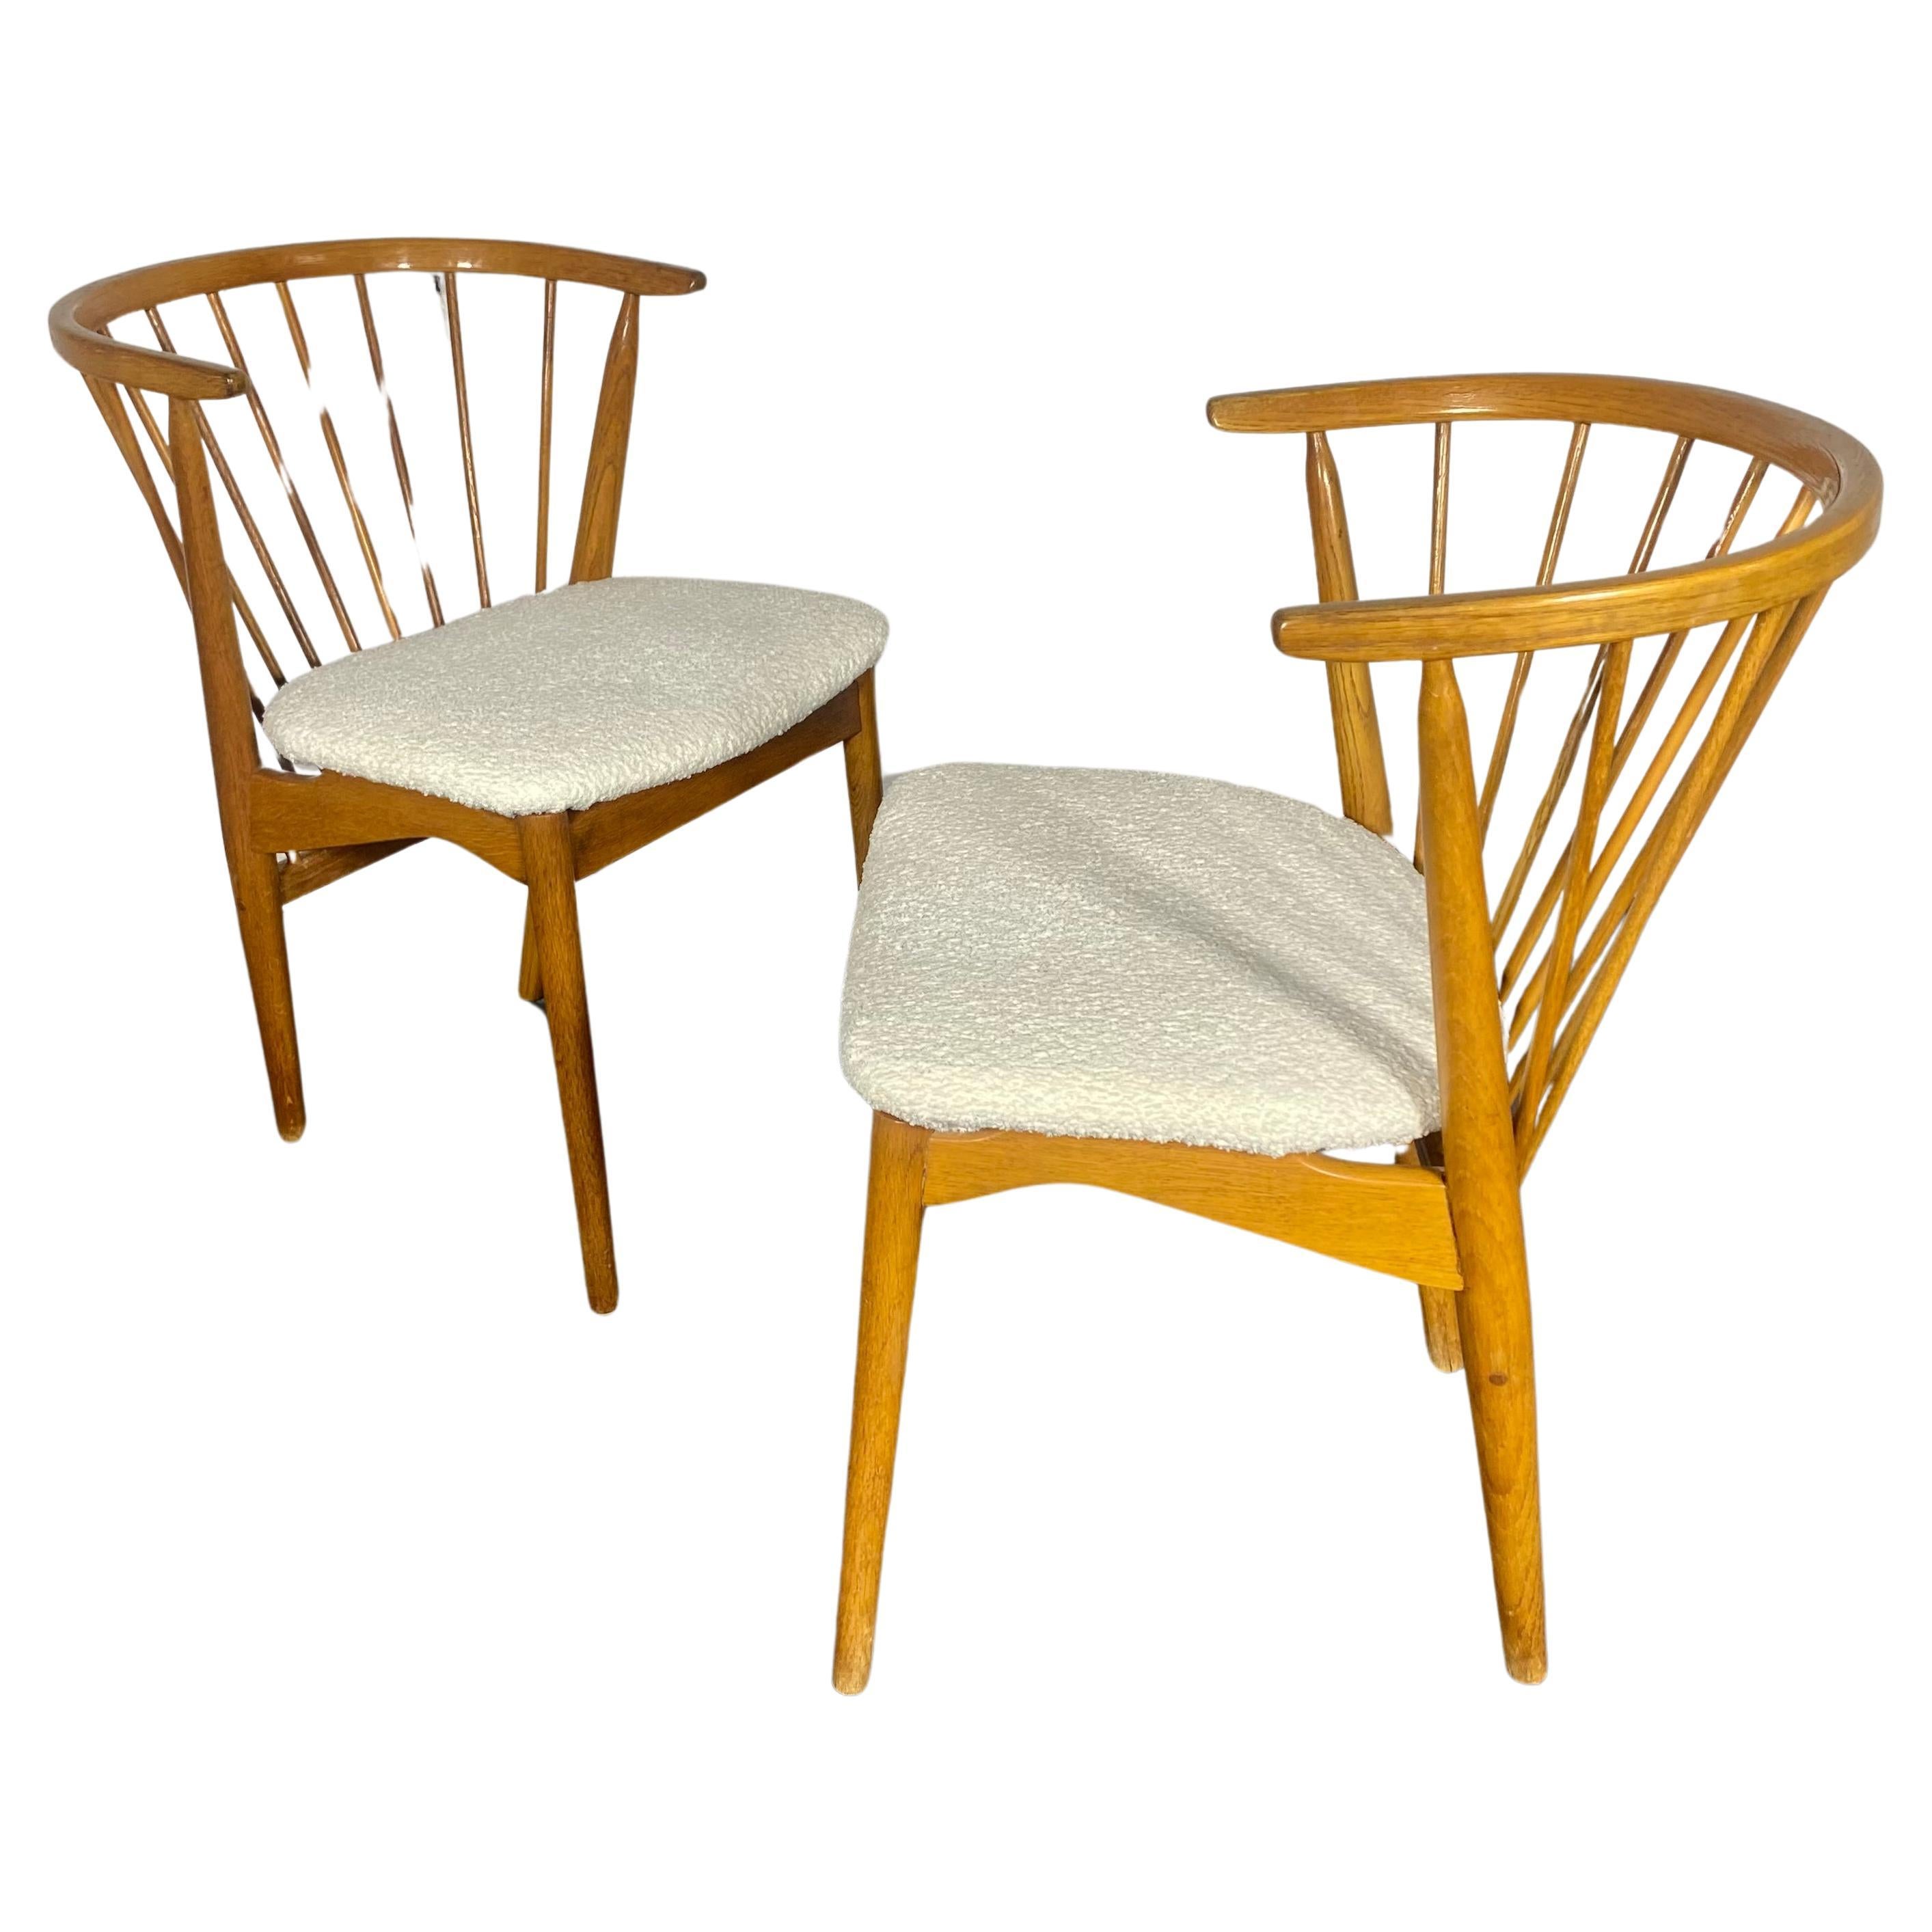 Pair cLASSIC Danish Spindle Barrel Back Arm Chairs by George Tanier / Denmark For Sale